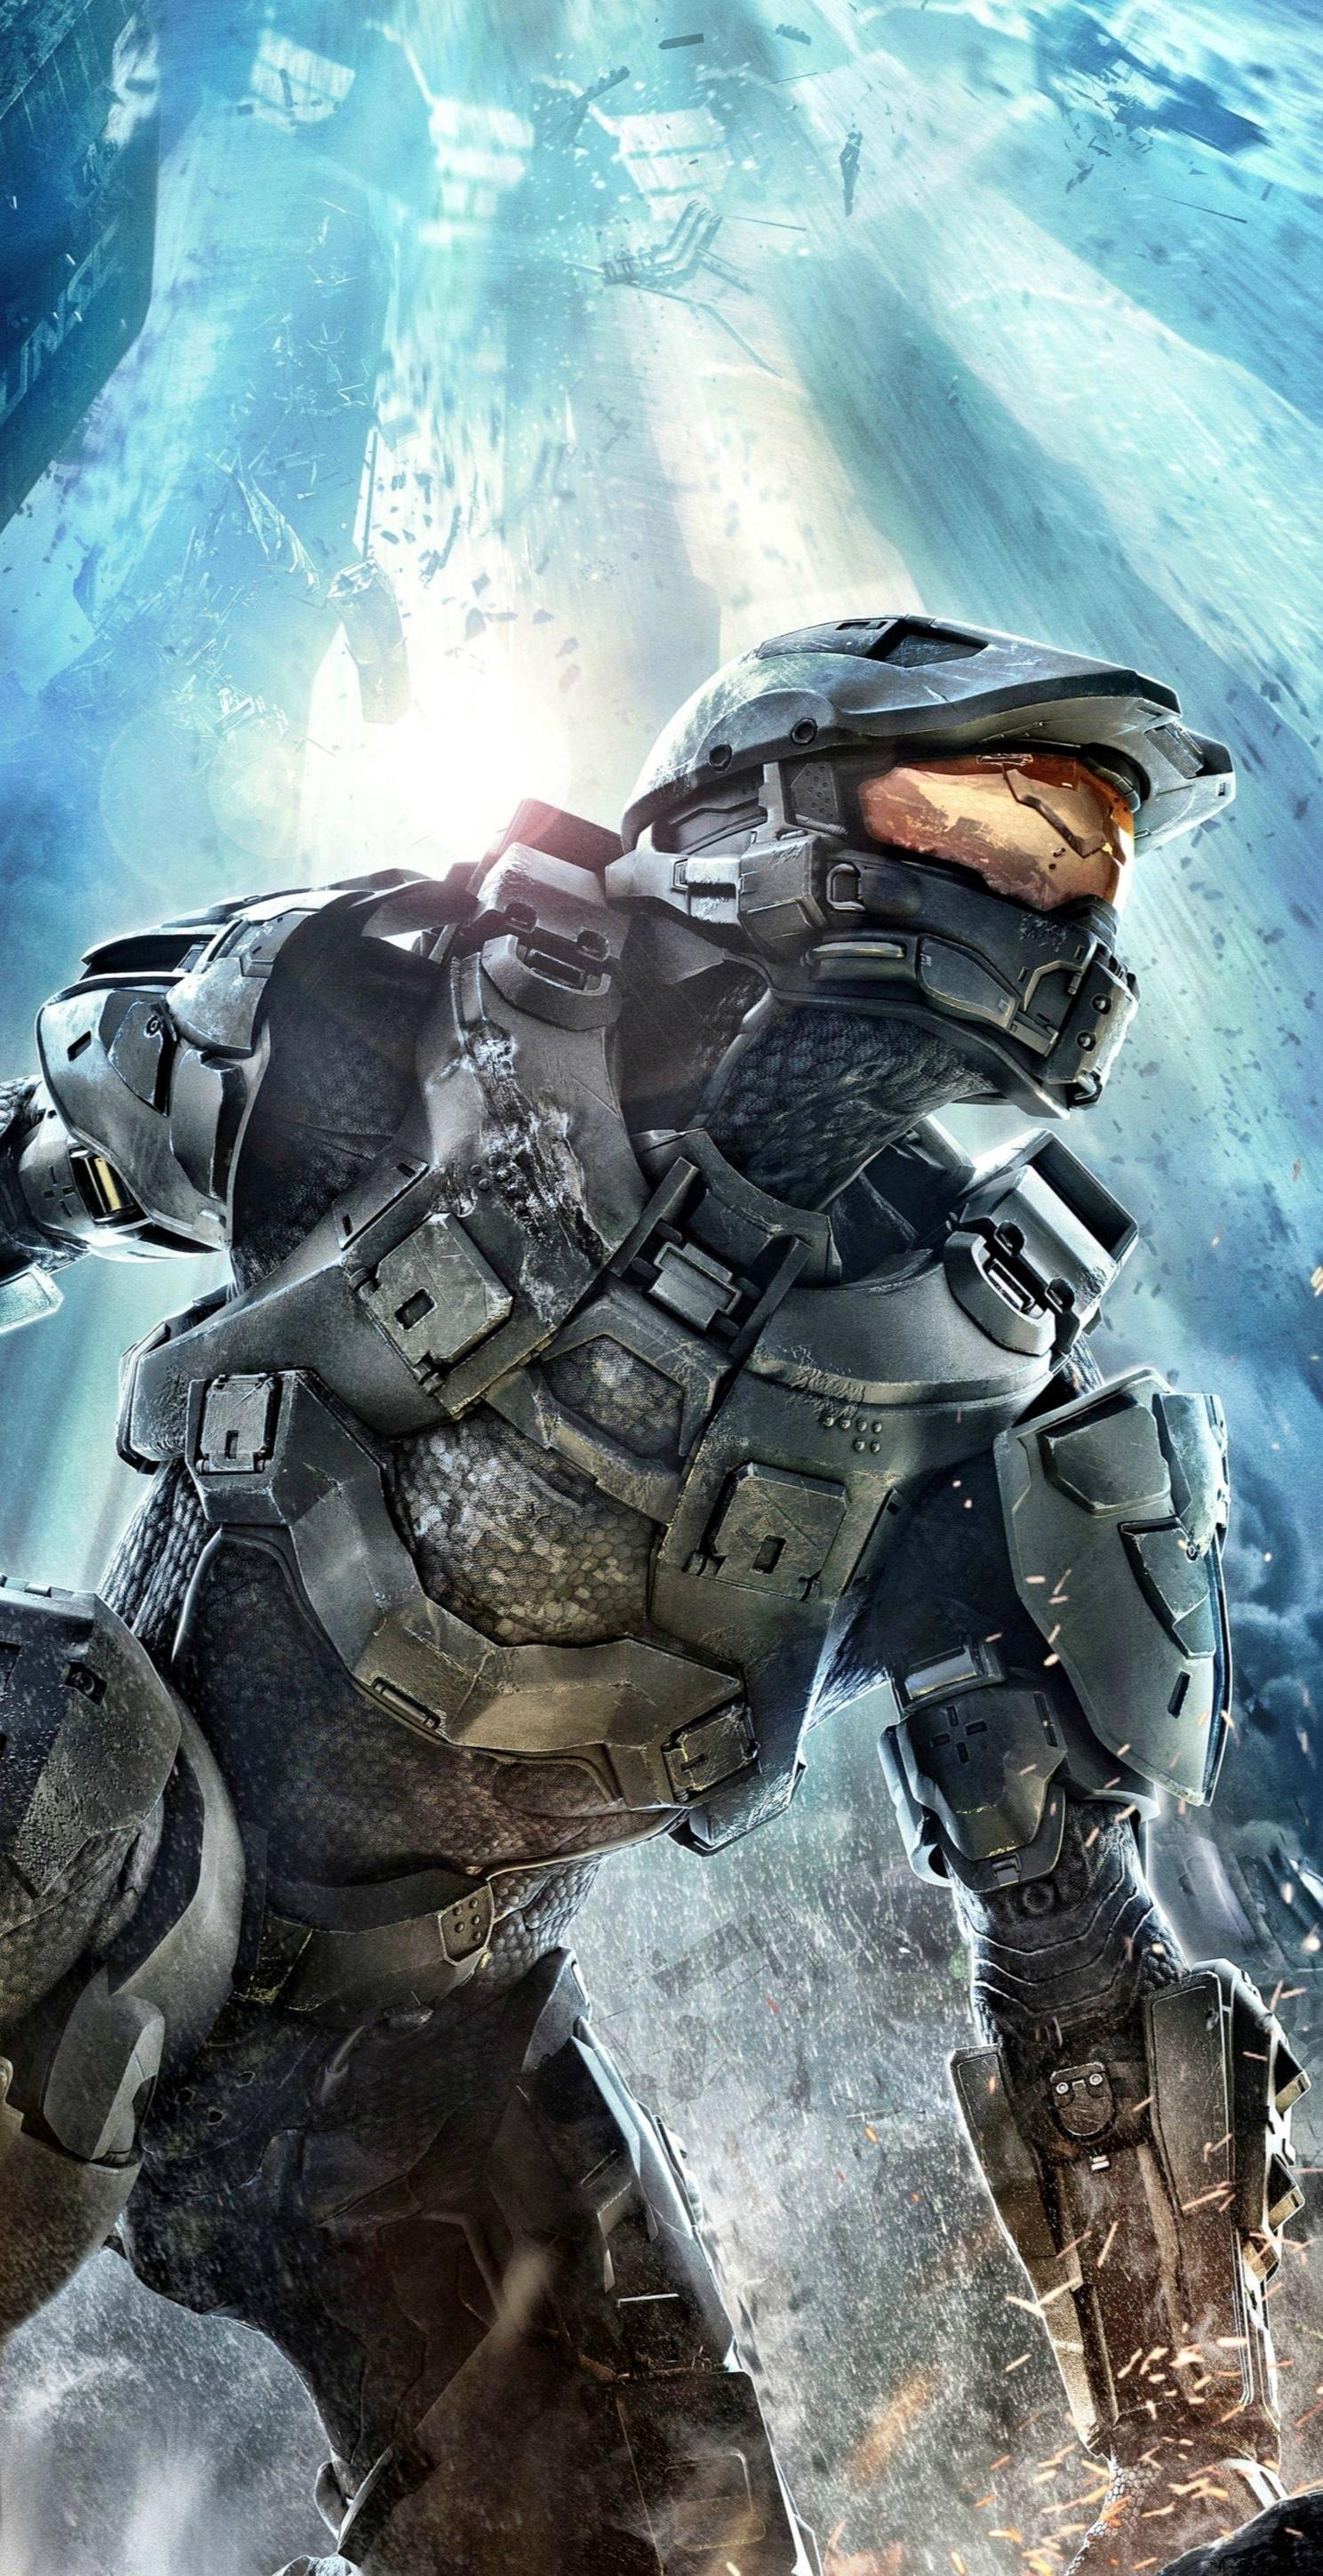 1488x2897 Halo 4 Wallpaper for iPhone 5